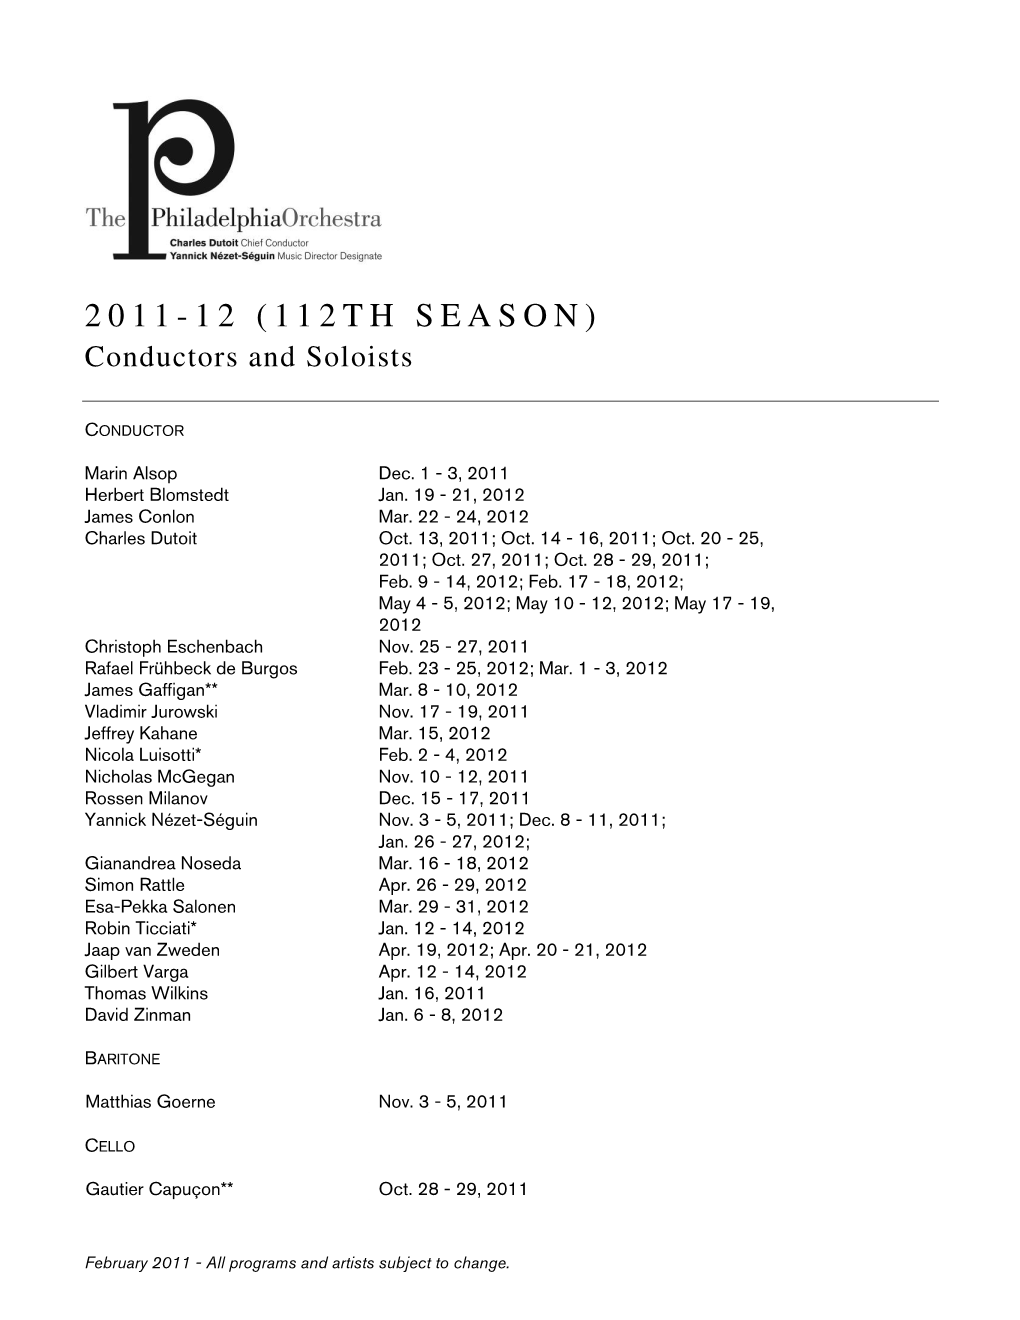 2011-12 (112TH SEASON) Conductors and Soloists